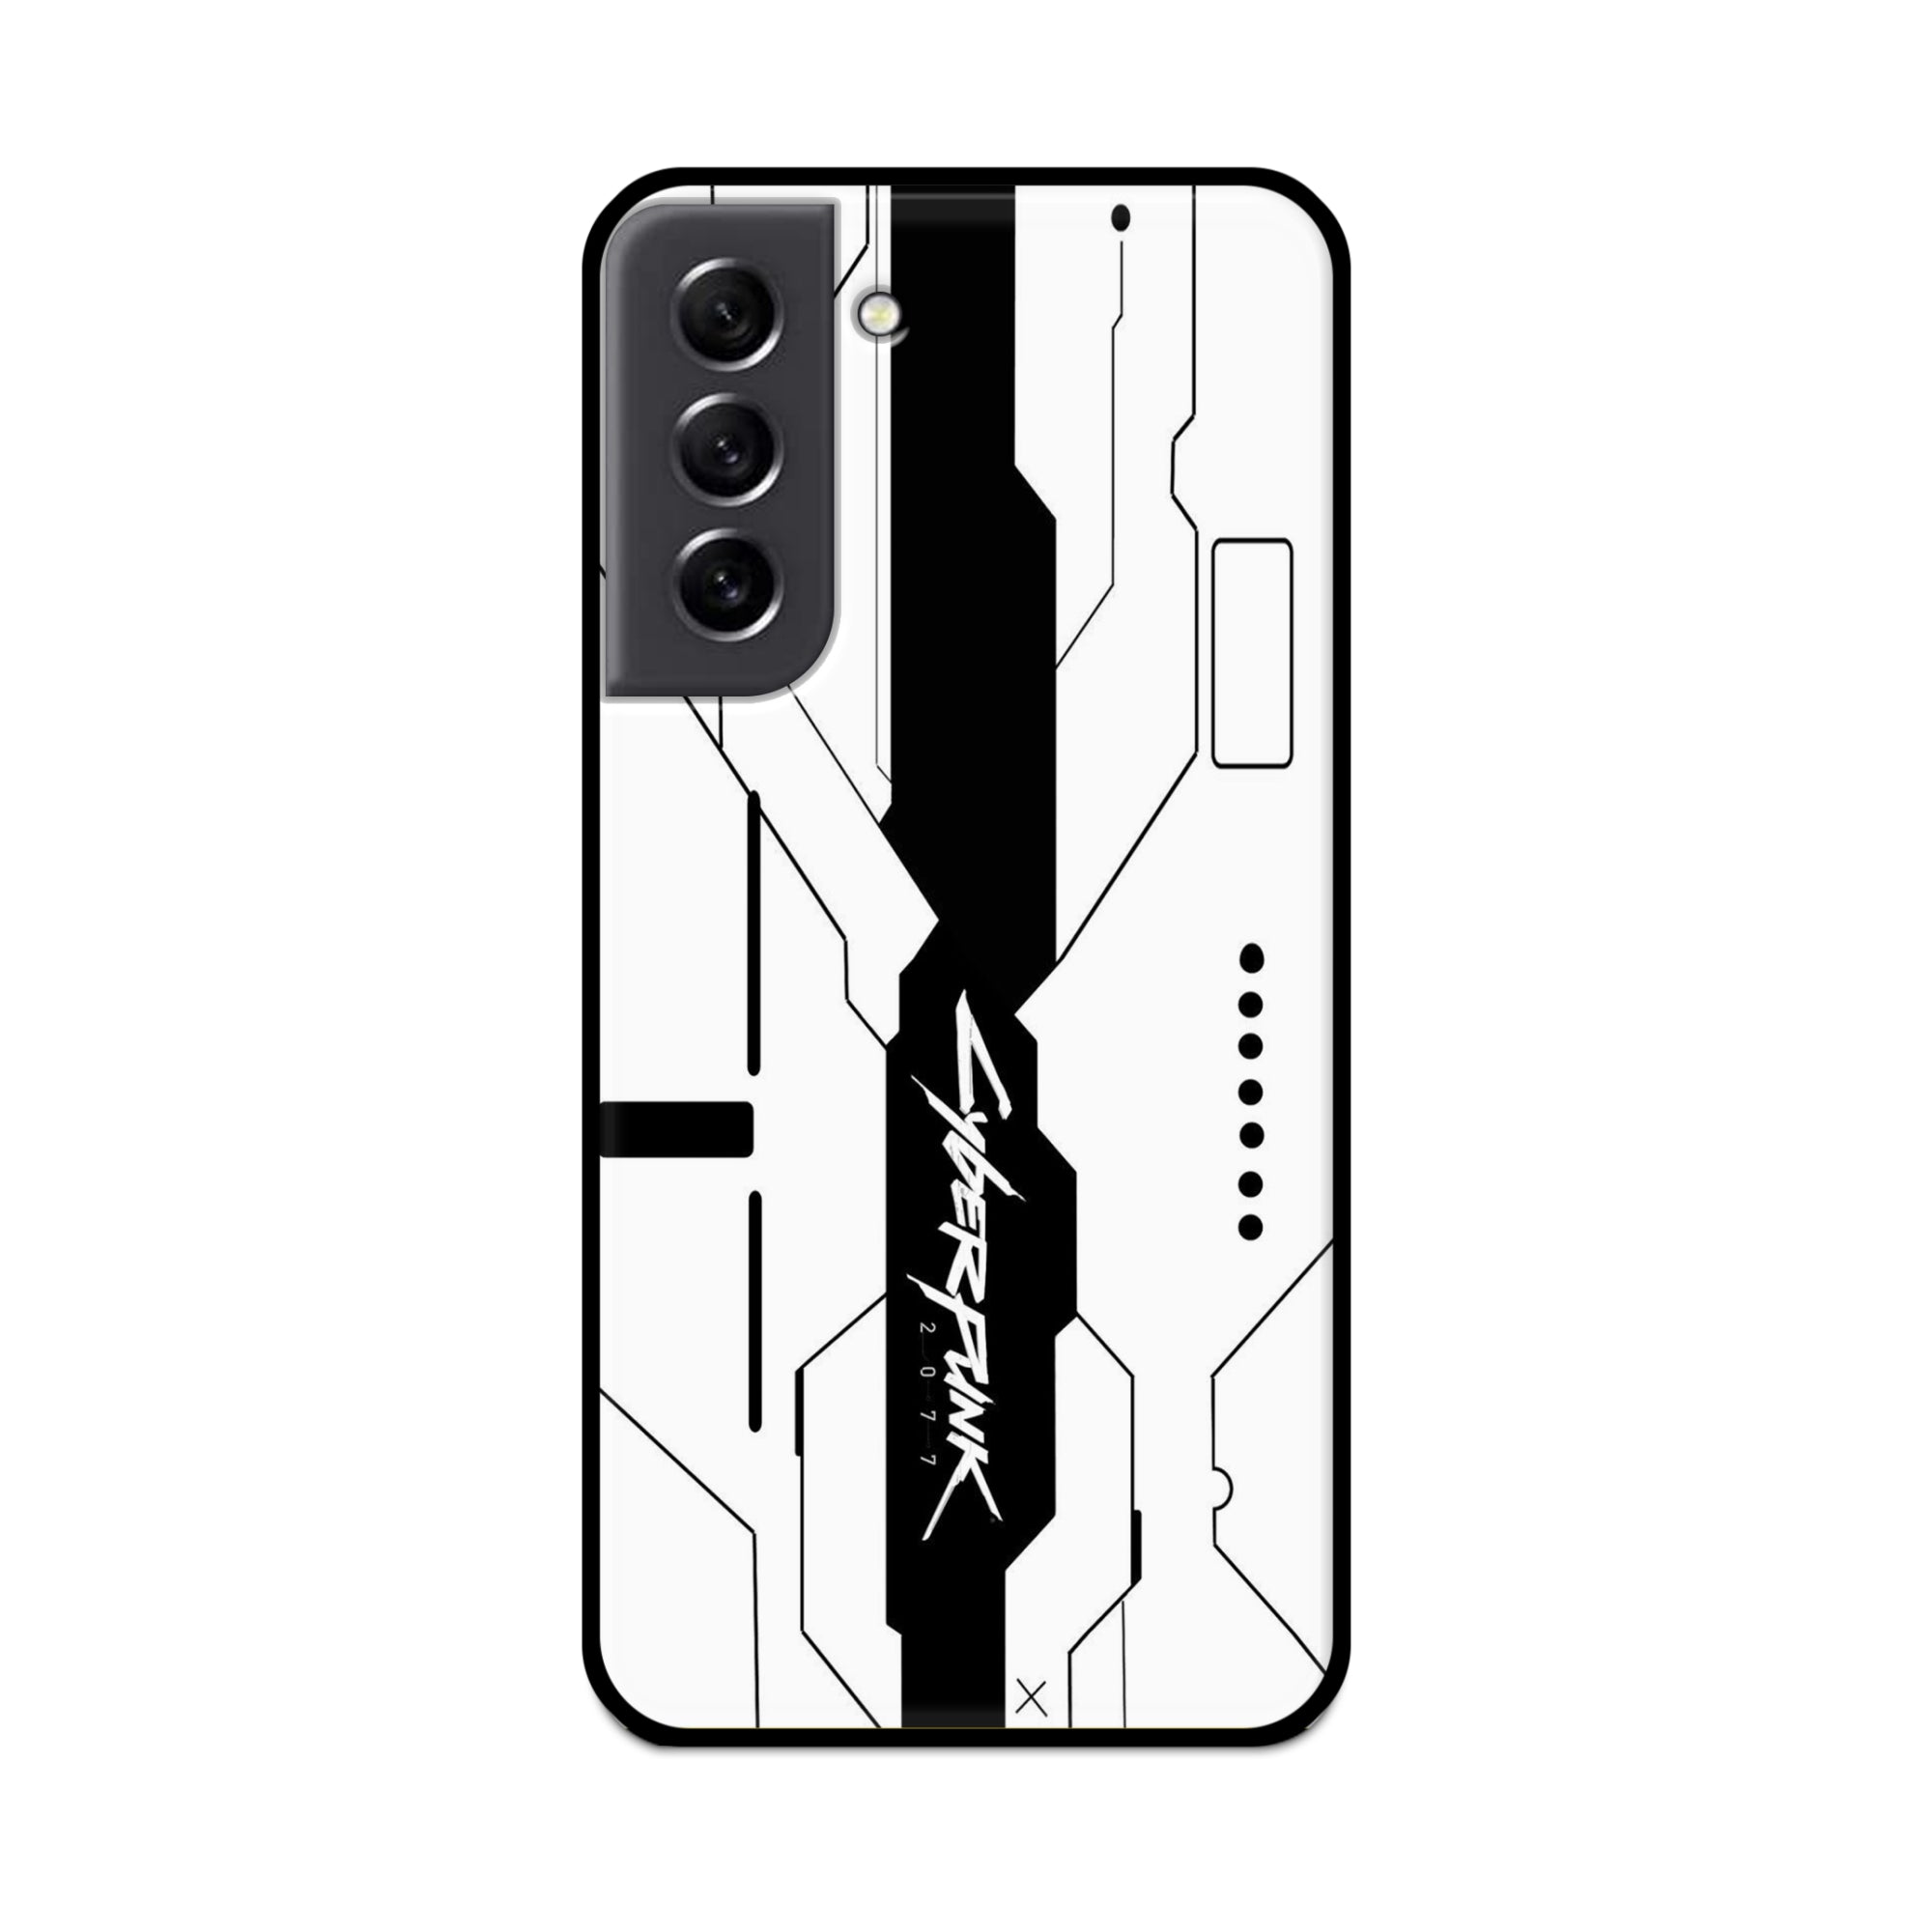 Buy Cyberpunk 2077 Metal-Silicon Back Mobile Phone Case/Cover For Samsung S21 FE Online